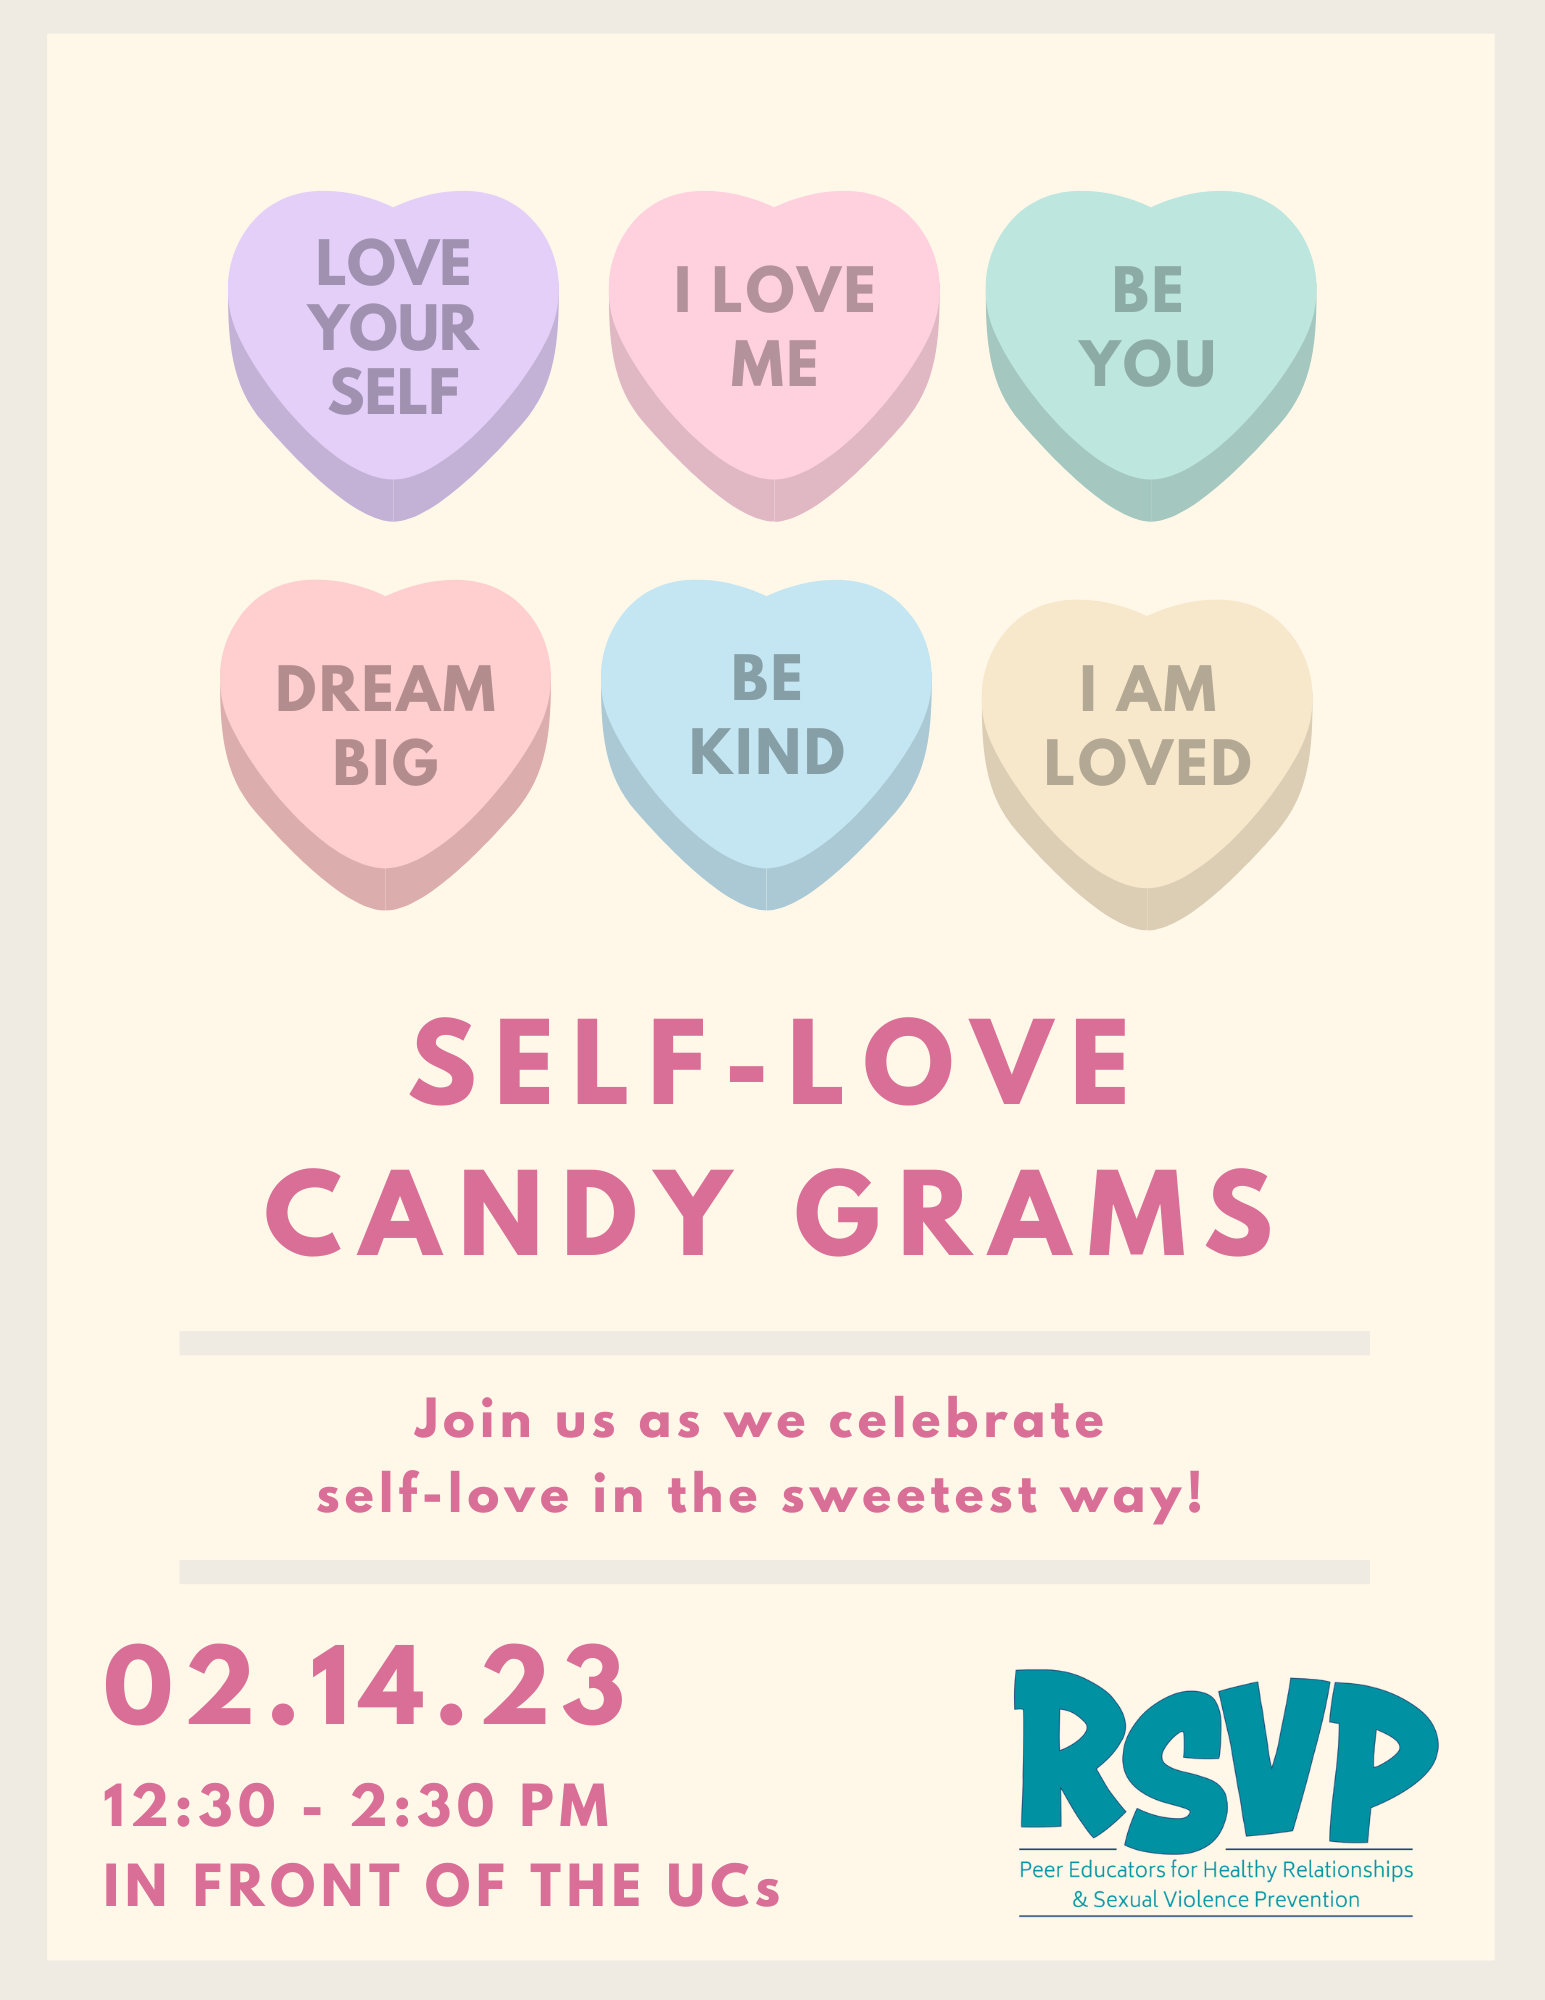 cream background with 6 candy hearts. text reads: "self-love candy grams; join us as we celebrate self-love in the sweetest way! 02.14.23, 12:30-2:30 PM, in front of the UCs"